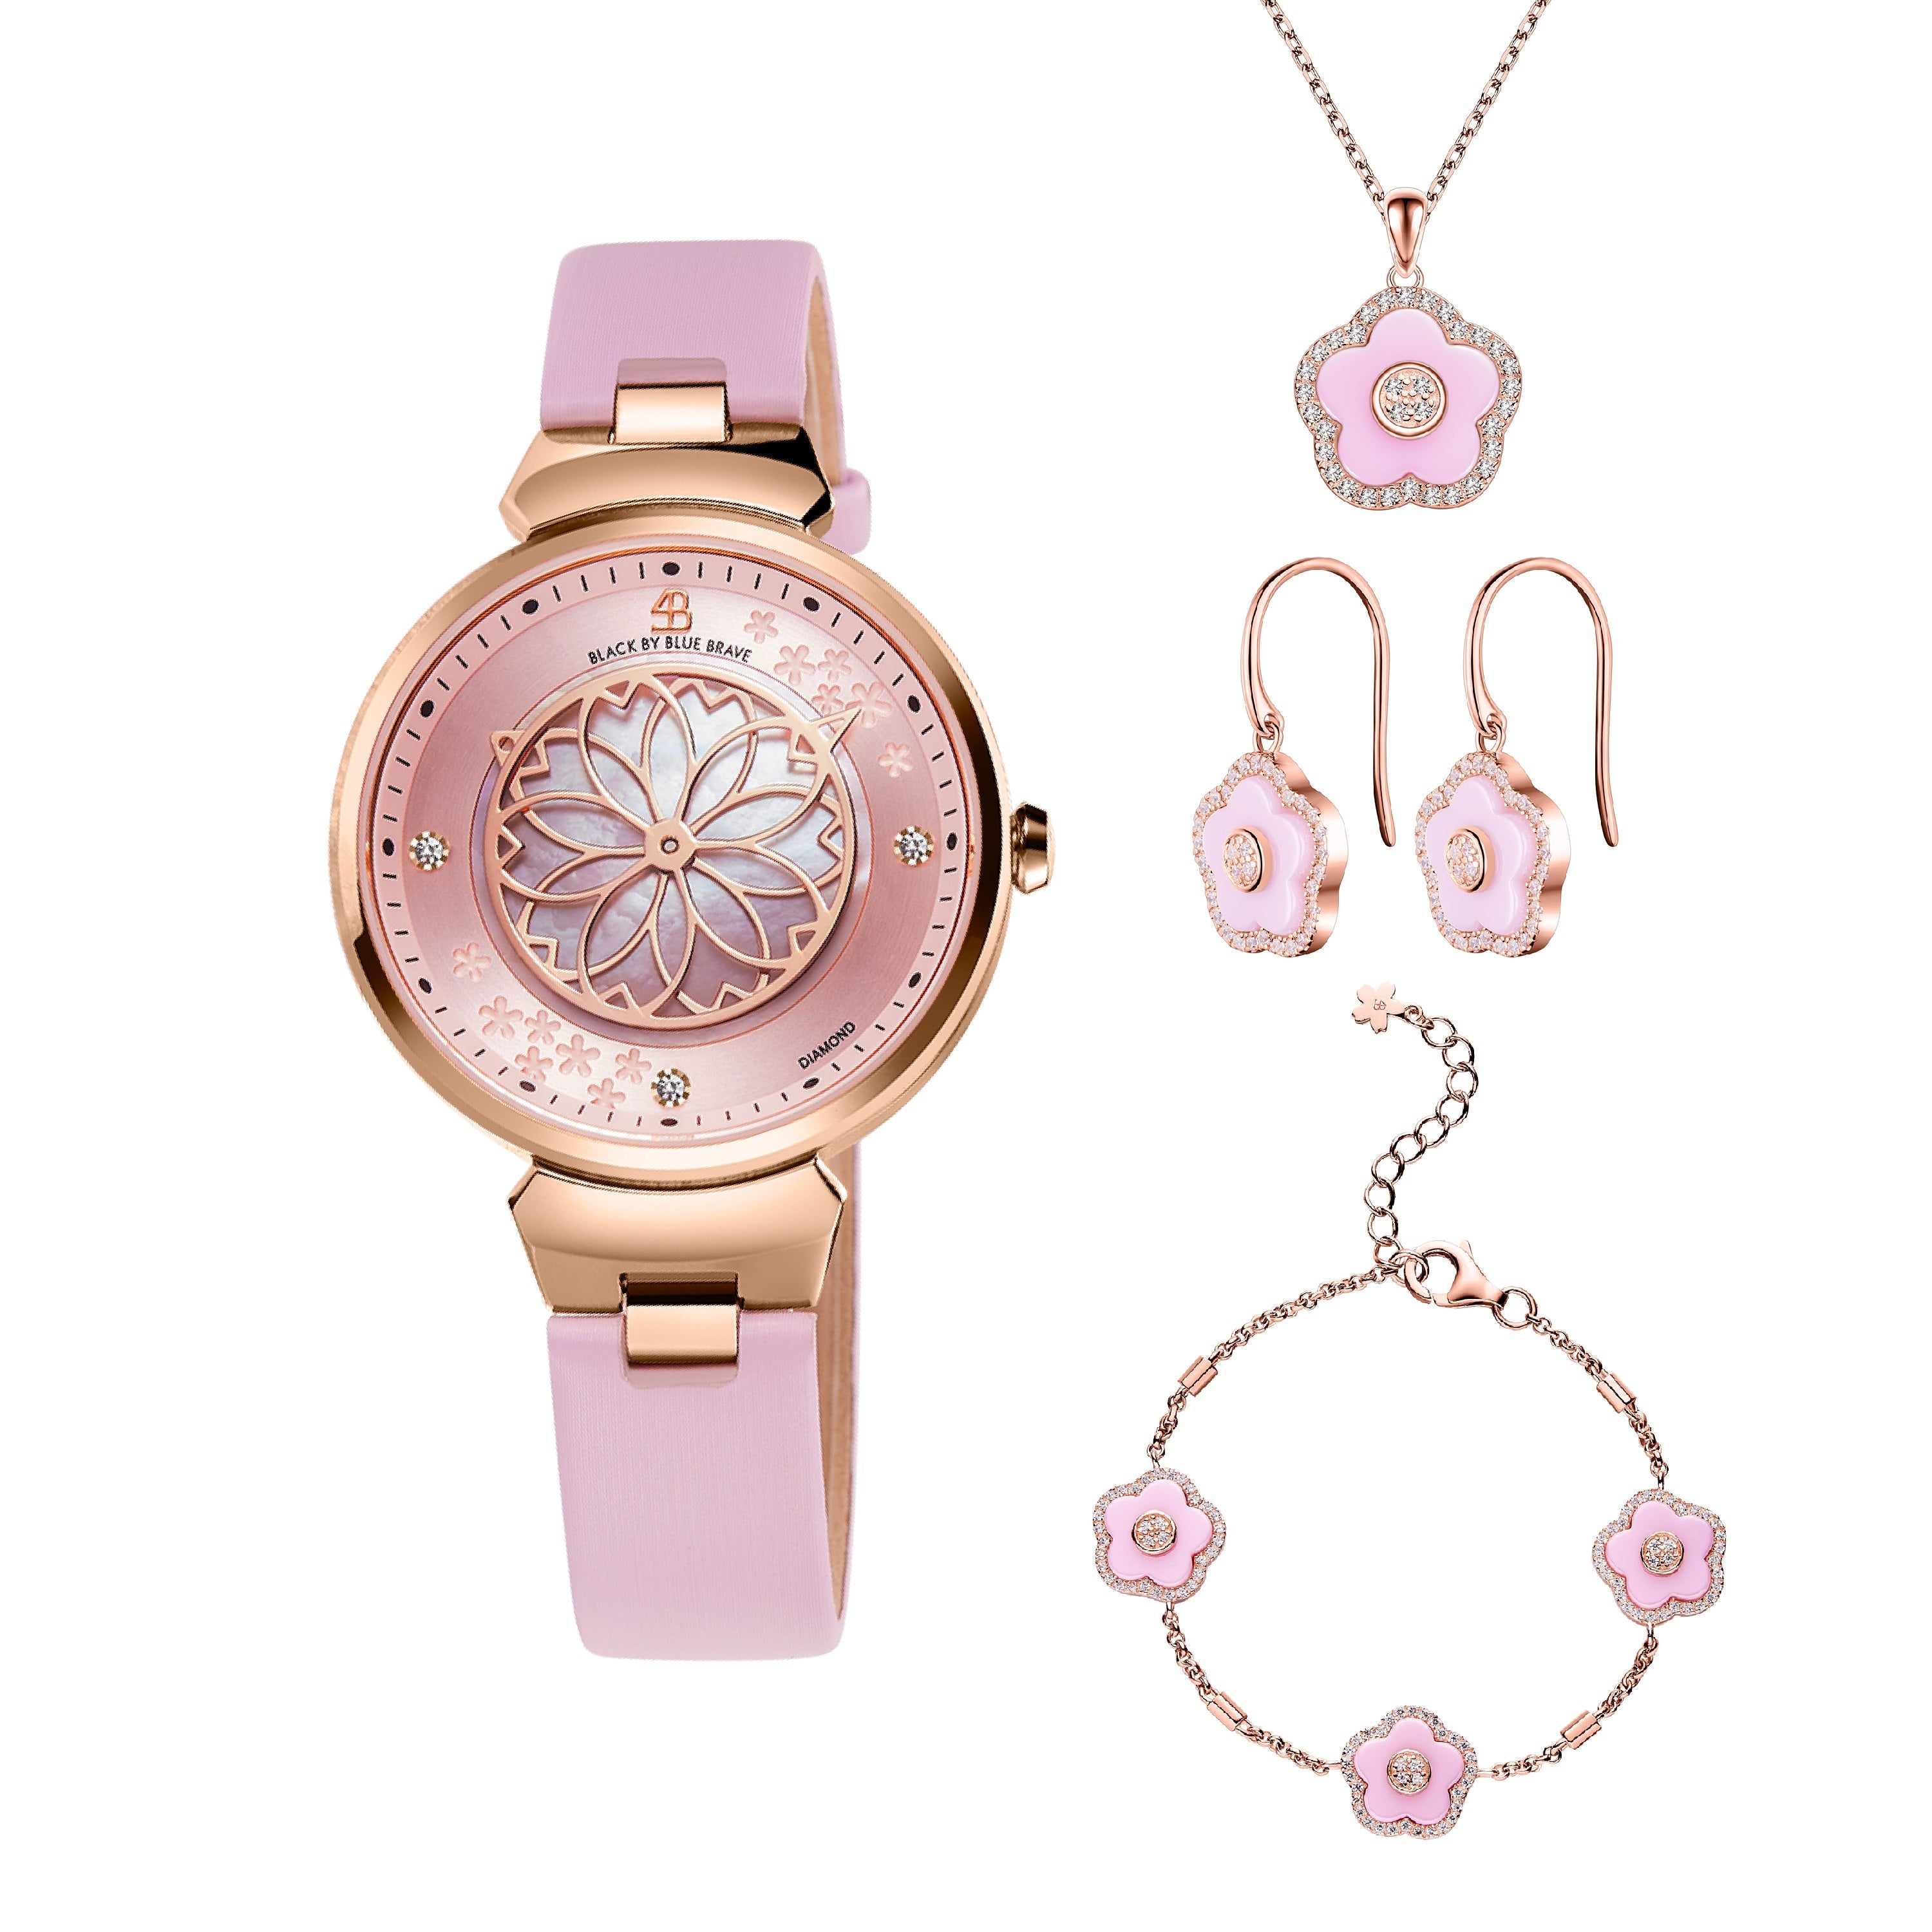 Pink Cherry Blossom Watch With Flower Ceramic Jewelleries (Earrings, Necklace and Bracelet)